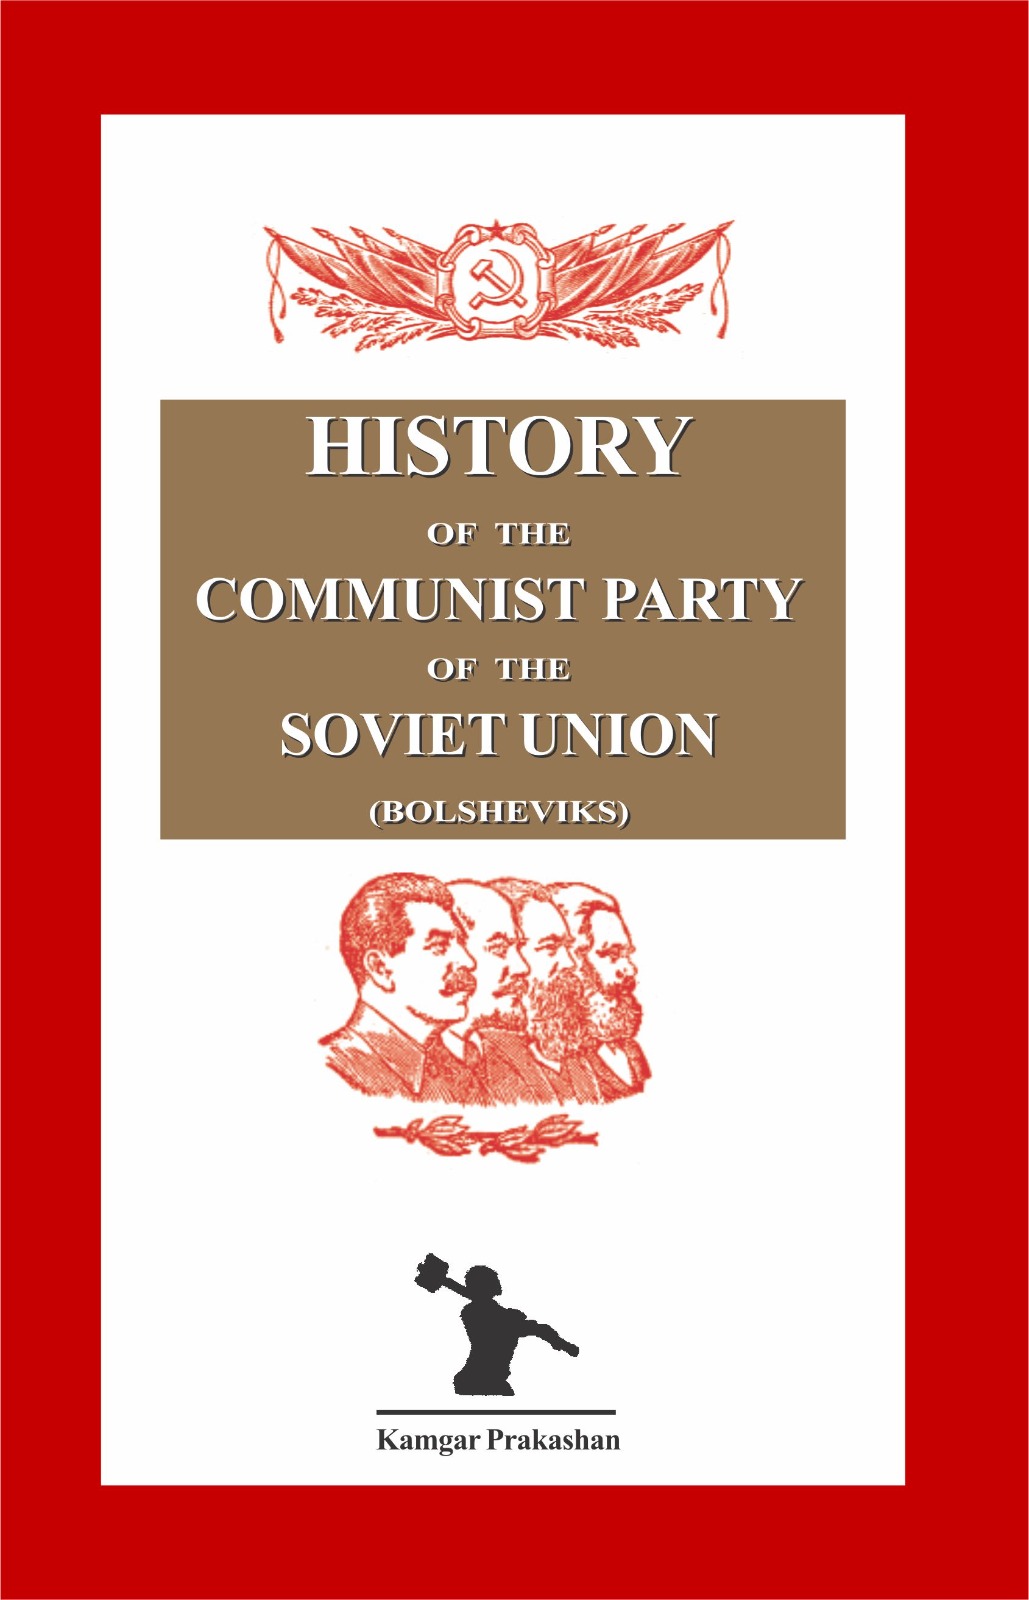 HISTORY OF THE COMMUNIST PARTY OF THE SOVIET UNION